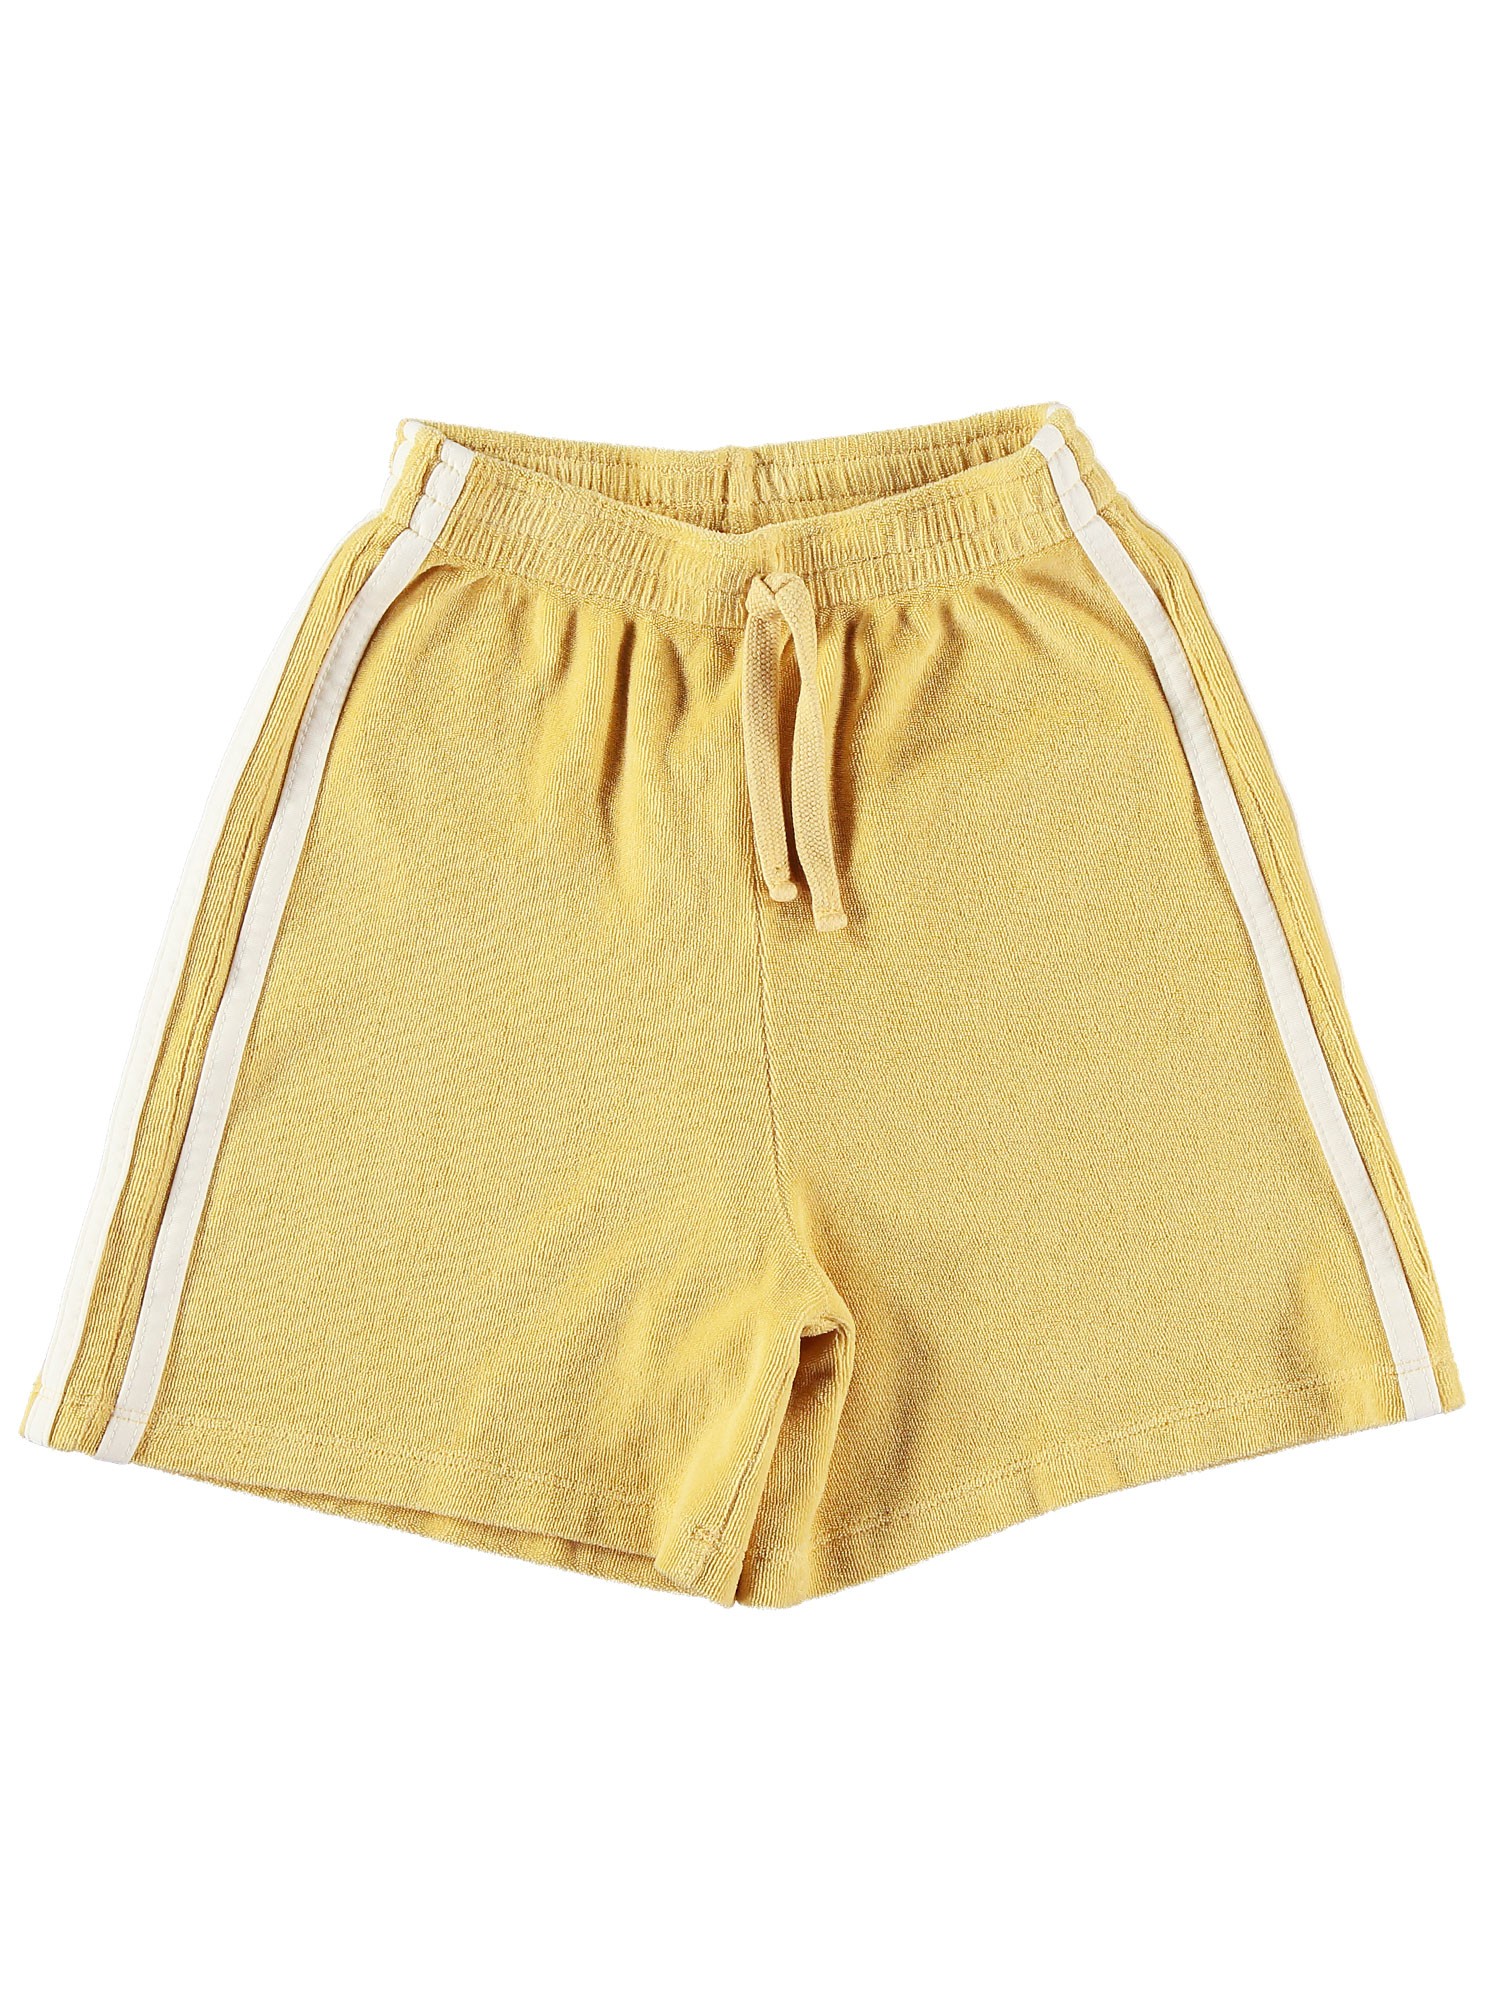 TERRY SHORTS WITH SIDE STRIPES 4